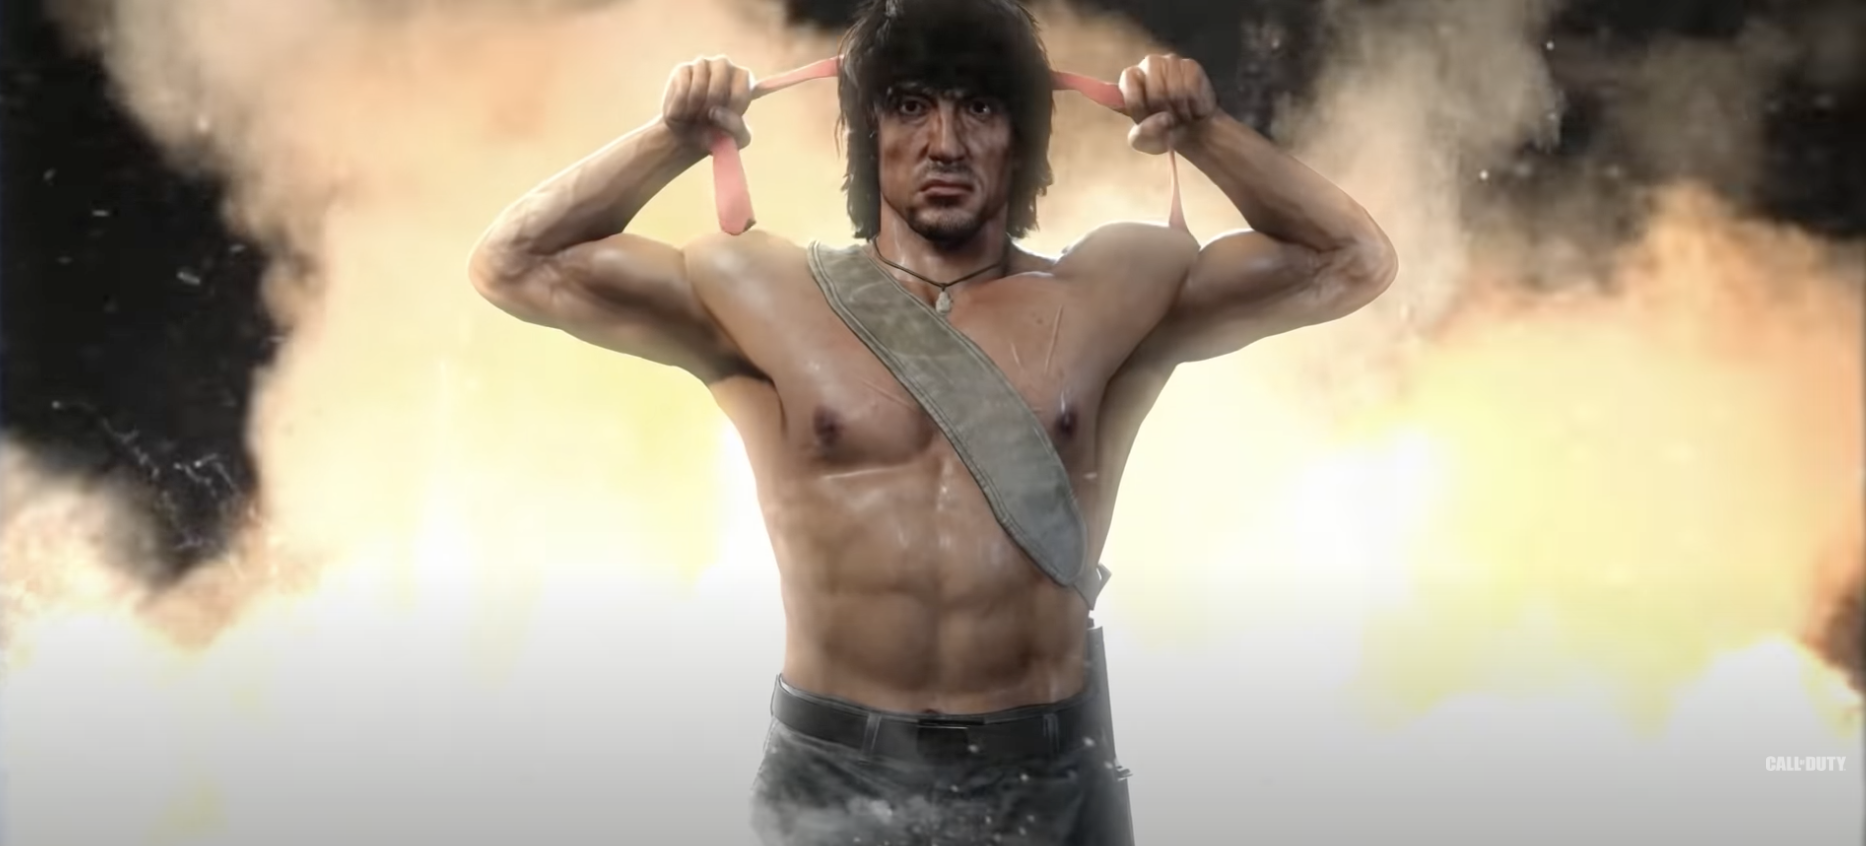 80s Action Heroes Rambo & John McClane Are Coming To 'Call of Duty' Games